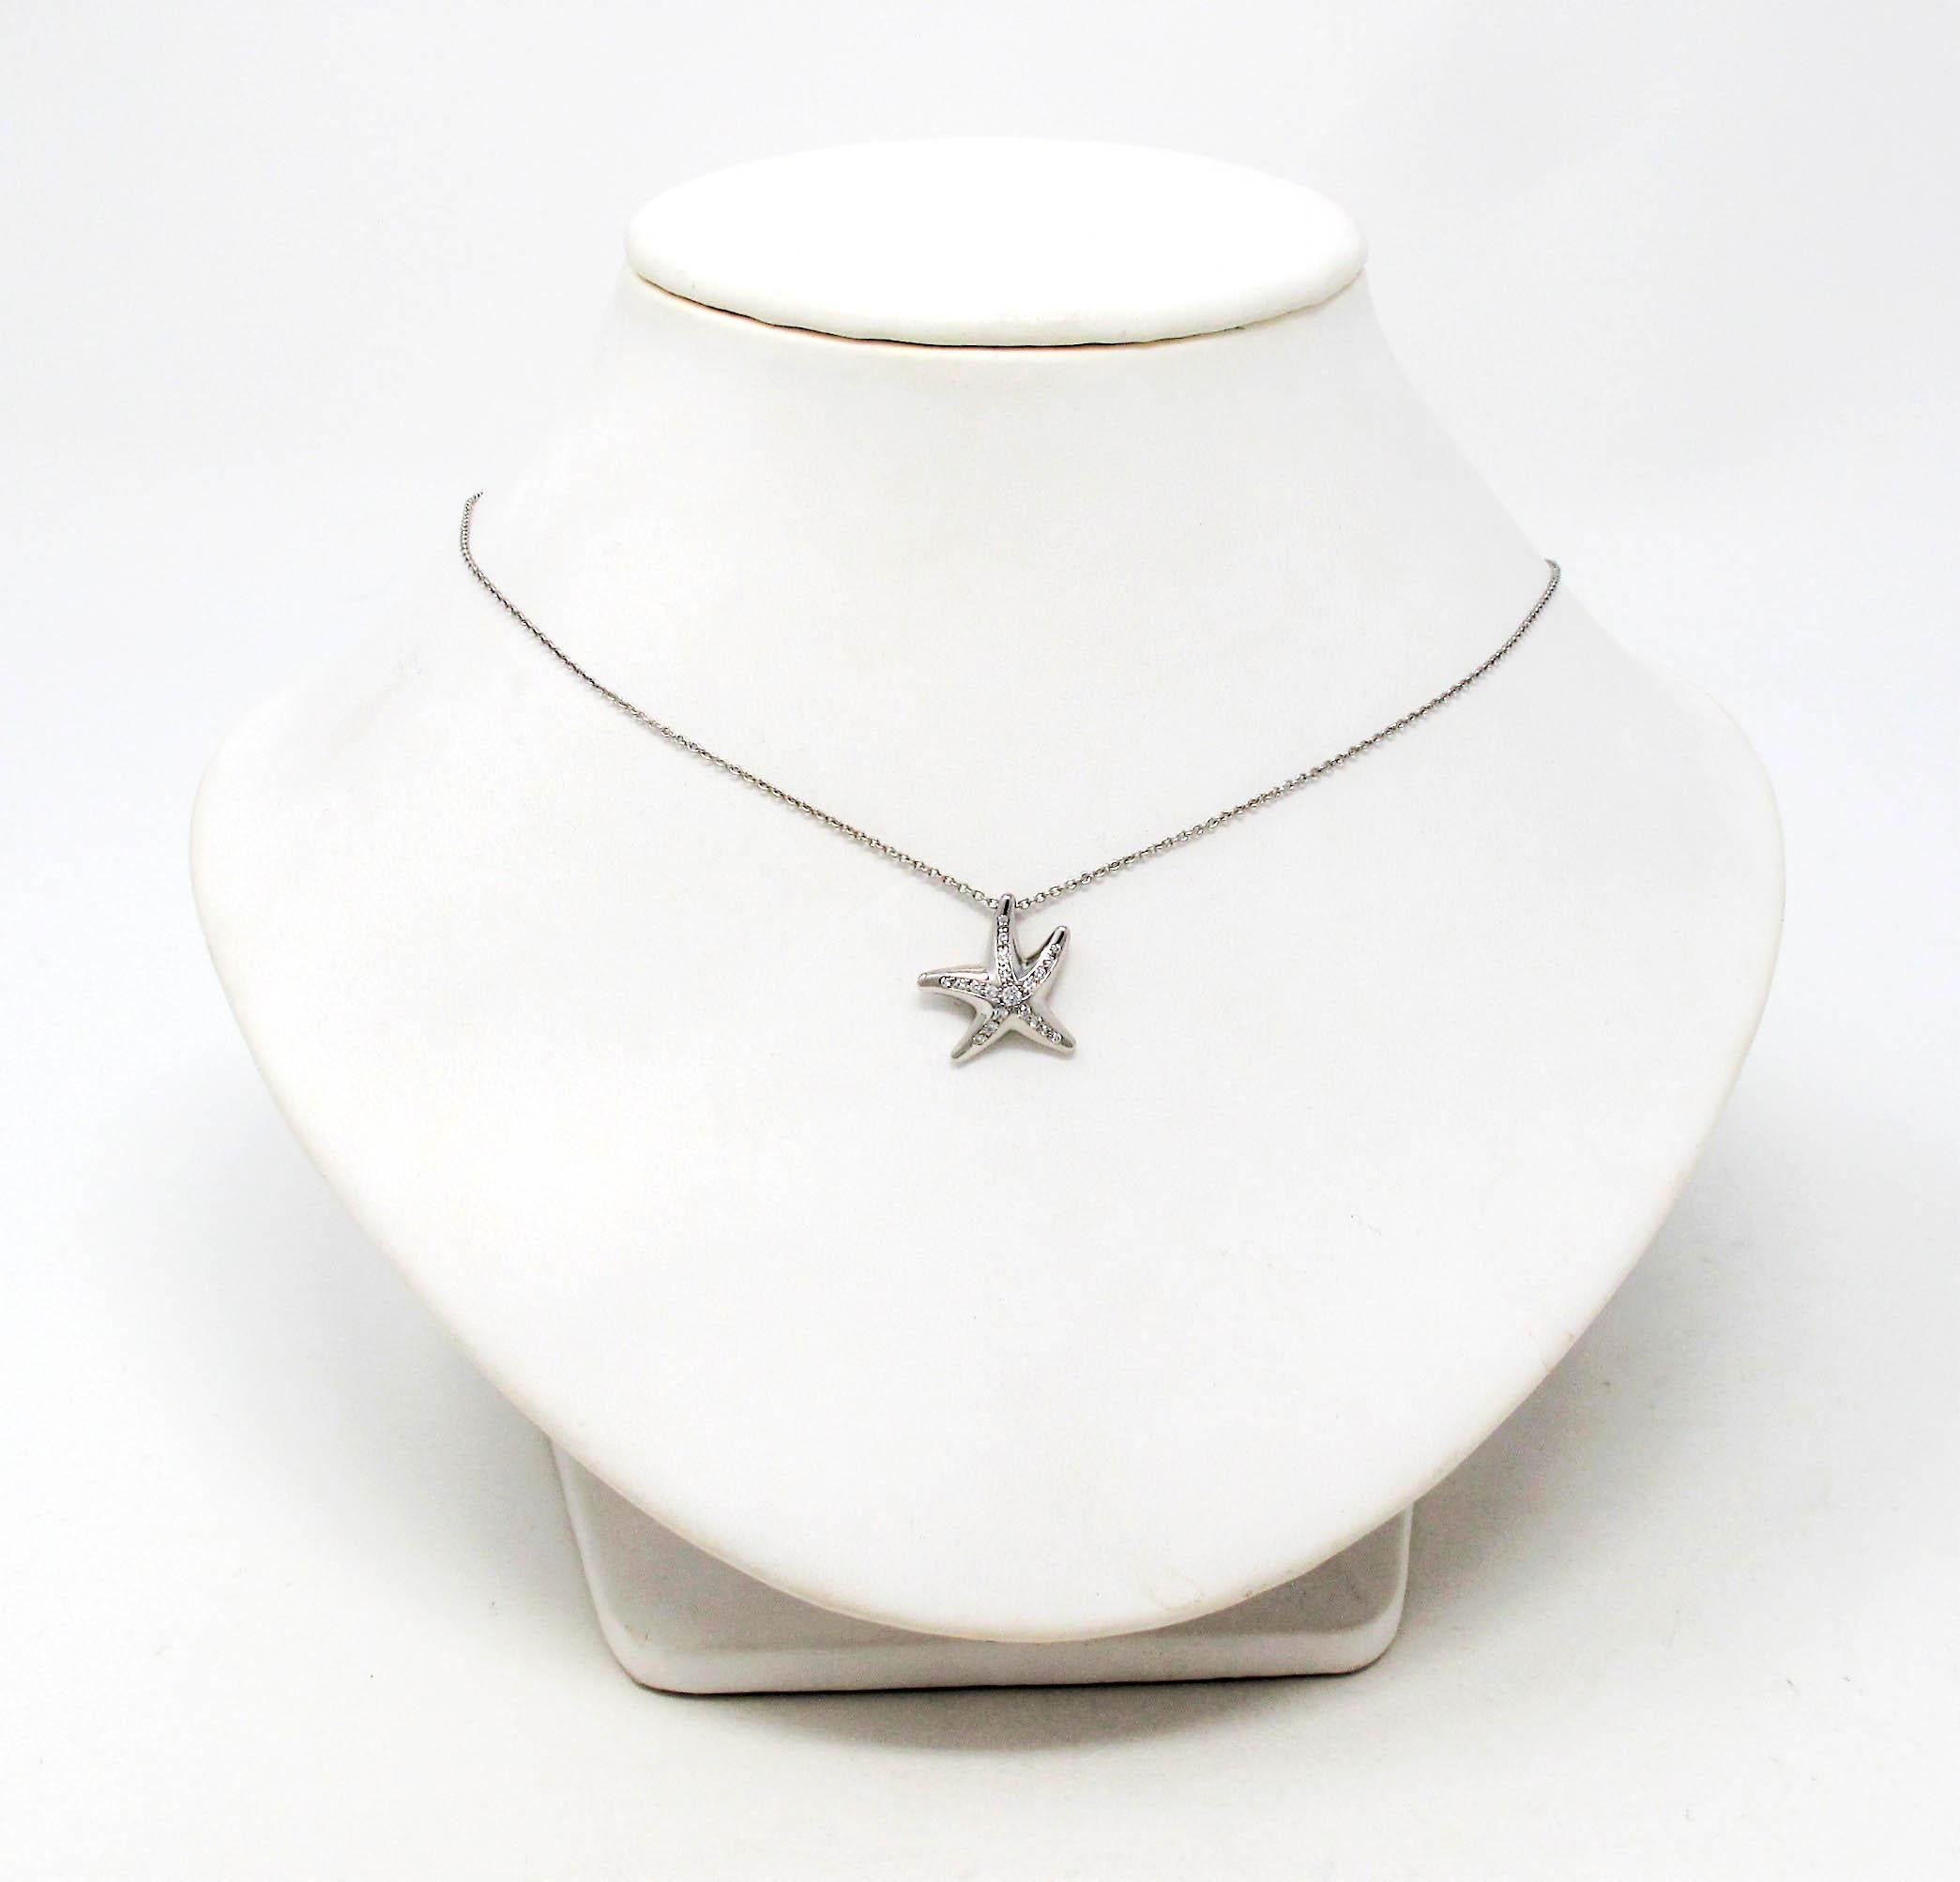 Calling all ocean lovers! This charming and delicate diamond starfish pendant necklace designed by Elsa Peretti for Tiffany & Co. will remind you of a dazzling day out at the sea. The modernized starfish motif is embellished with glittering Tiffany